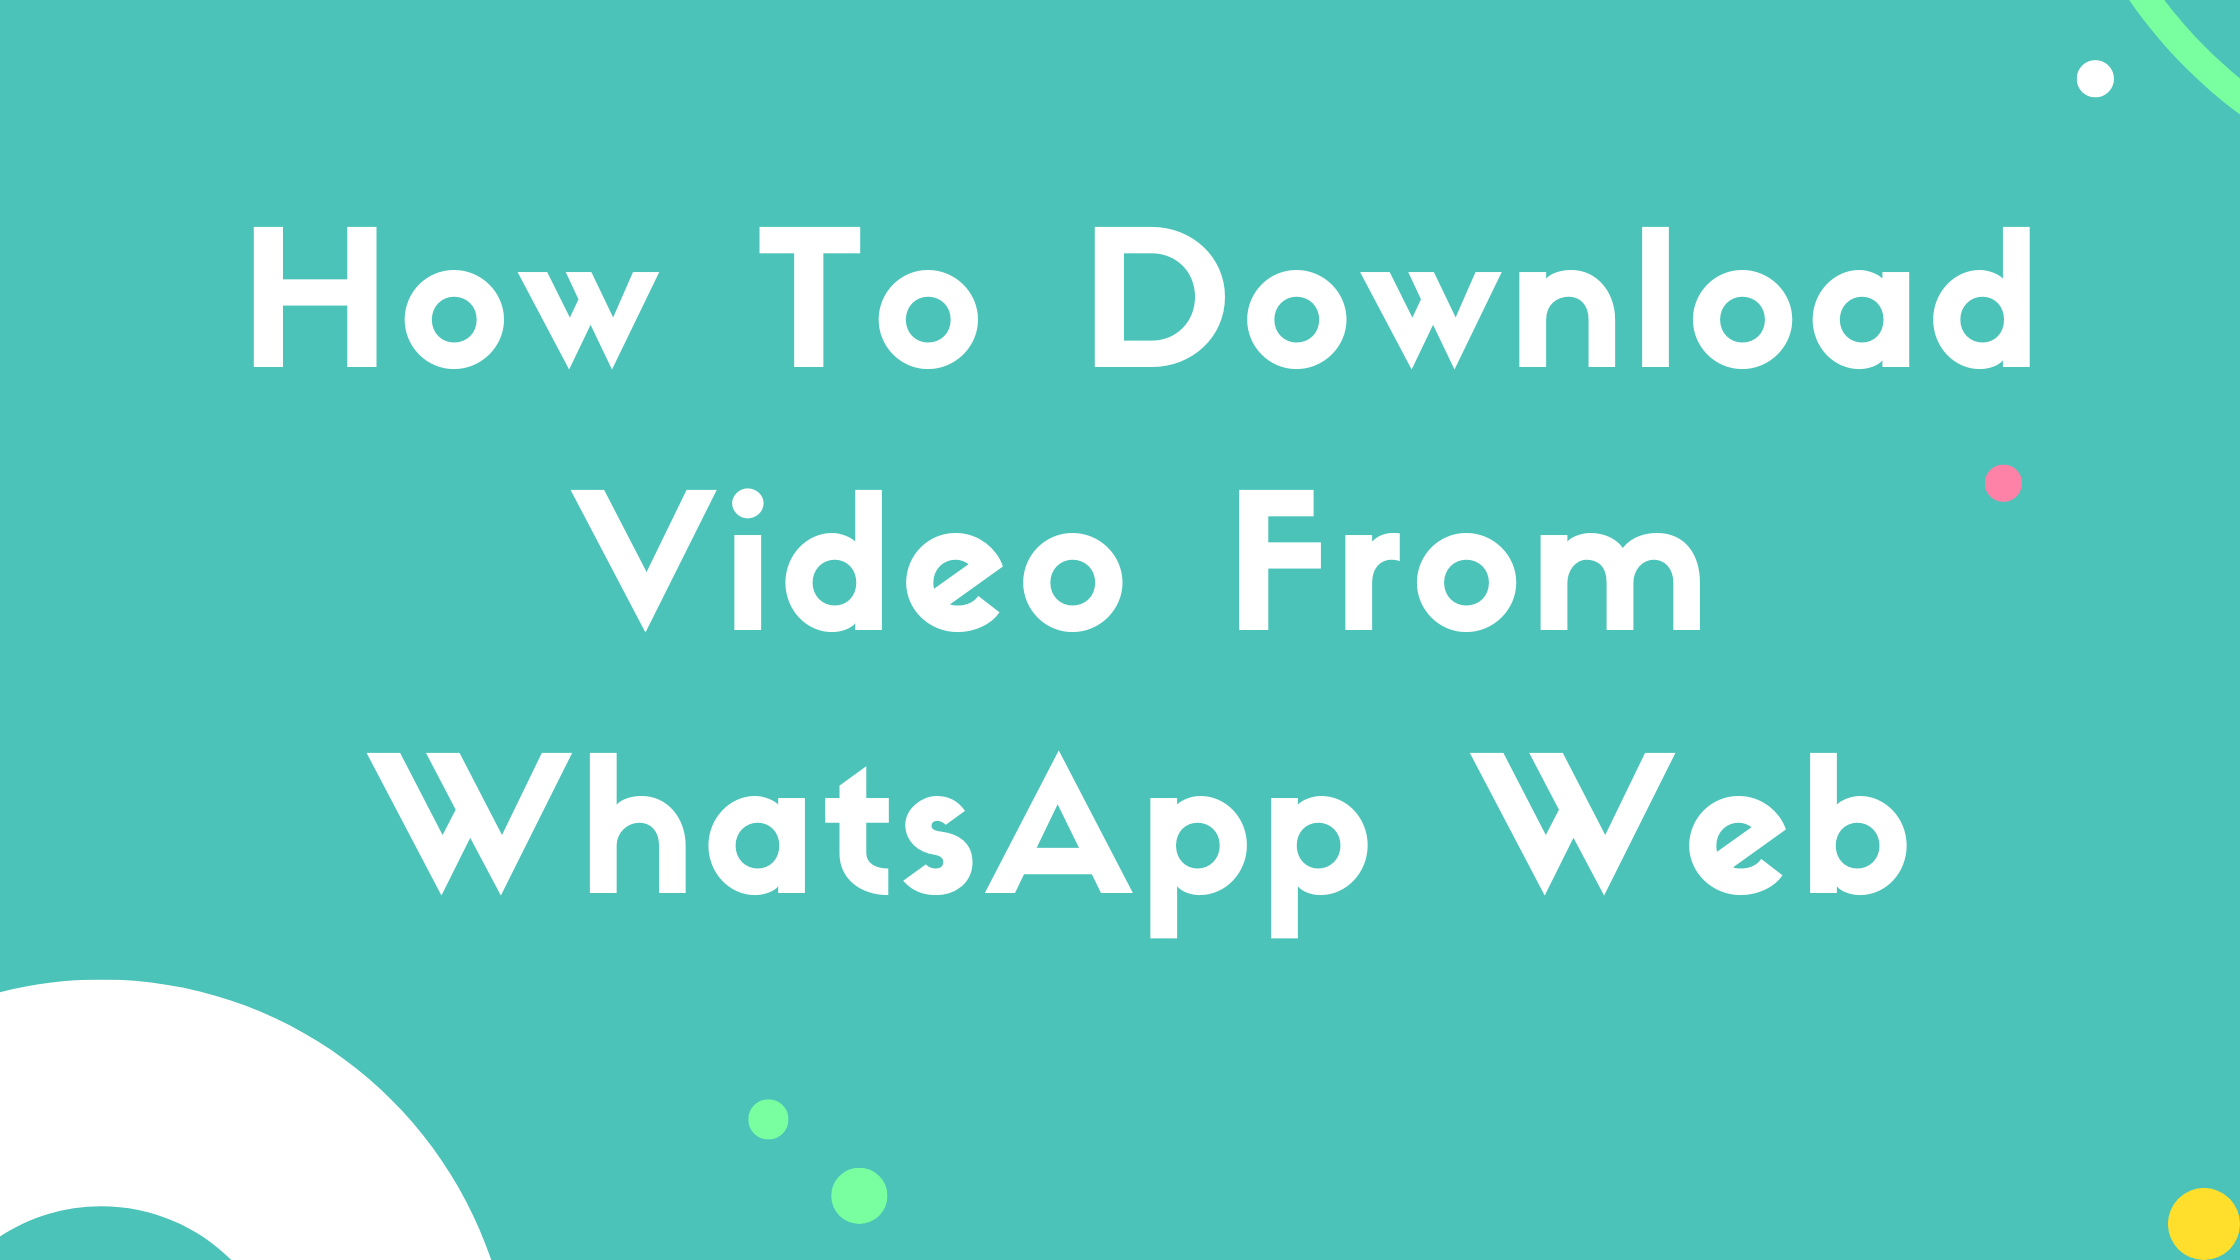 How To Download Video From WhatsApp Web